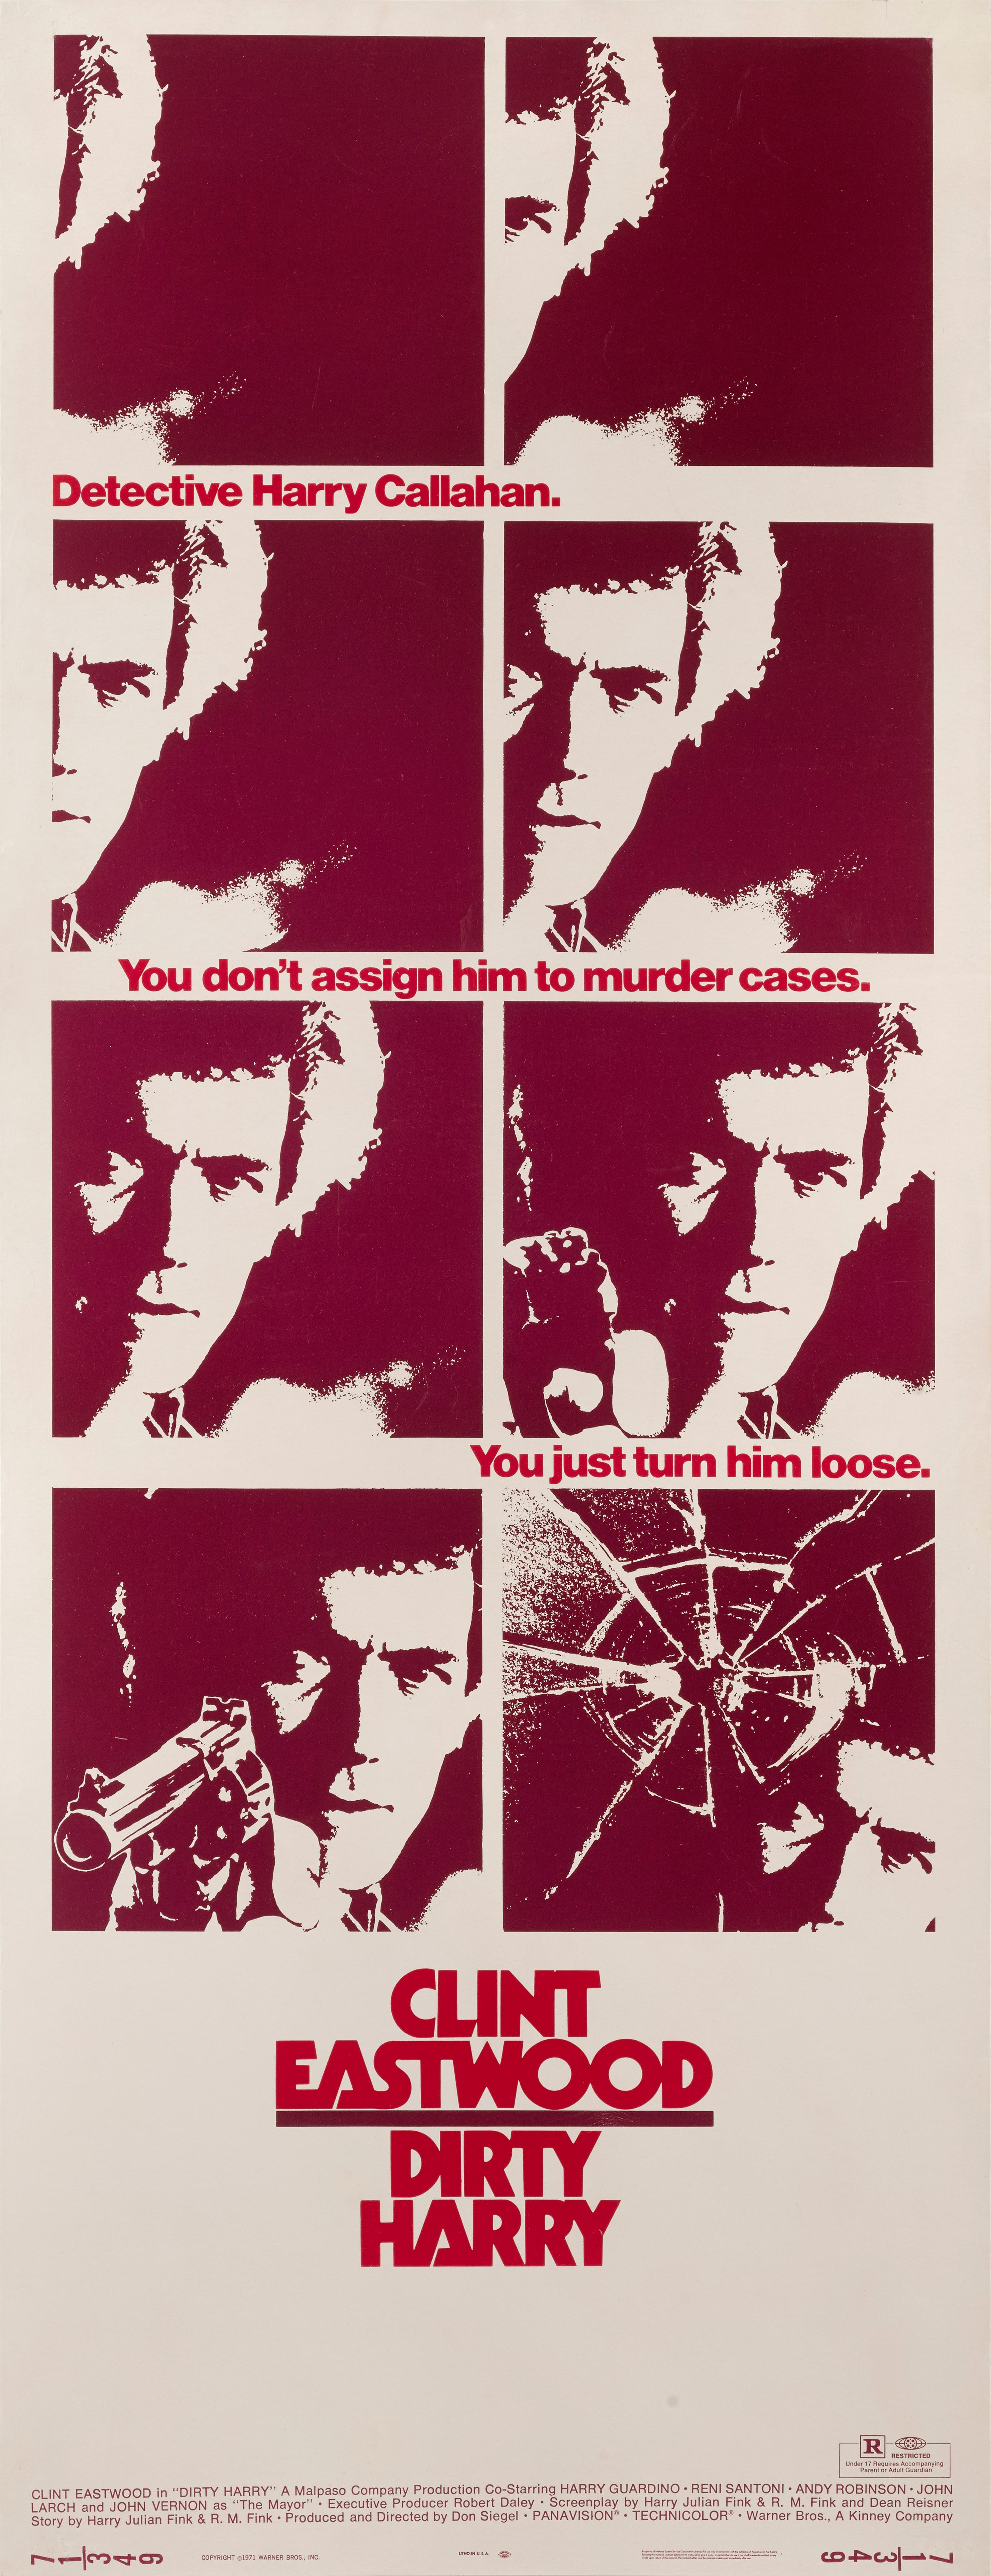 Original US film poster for Clint Eastwood's 1971 classic thriller.
This film was produced and directed by Don Siegel, and was the first in the Dirty Harry series. Clint Eastwood plays the title role, in his first outing as San Francisco Police